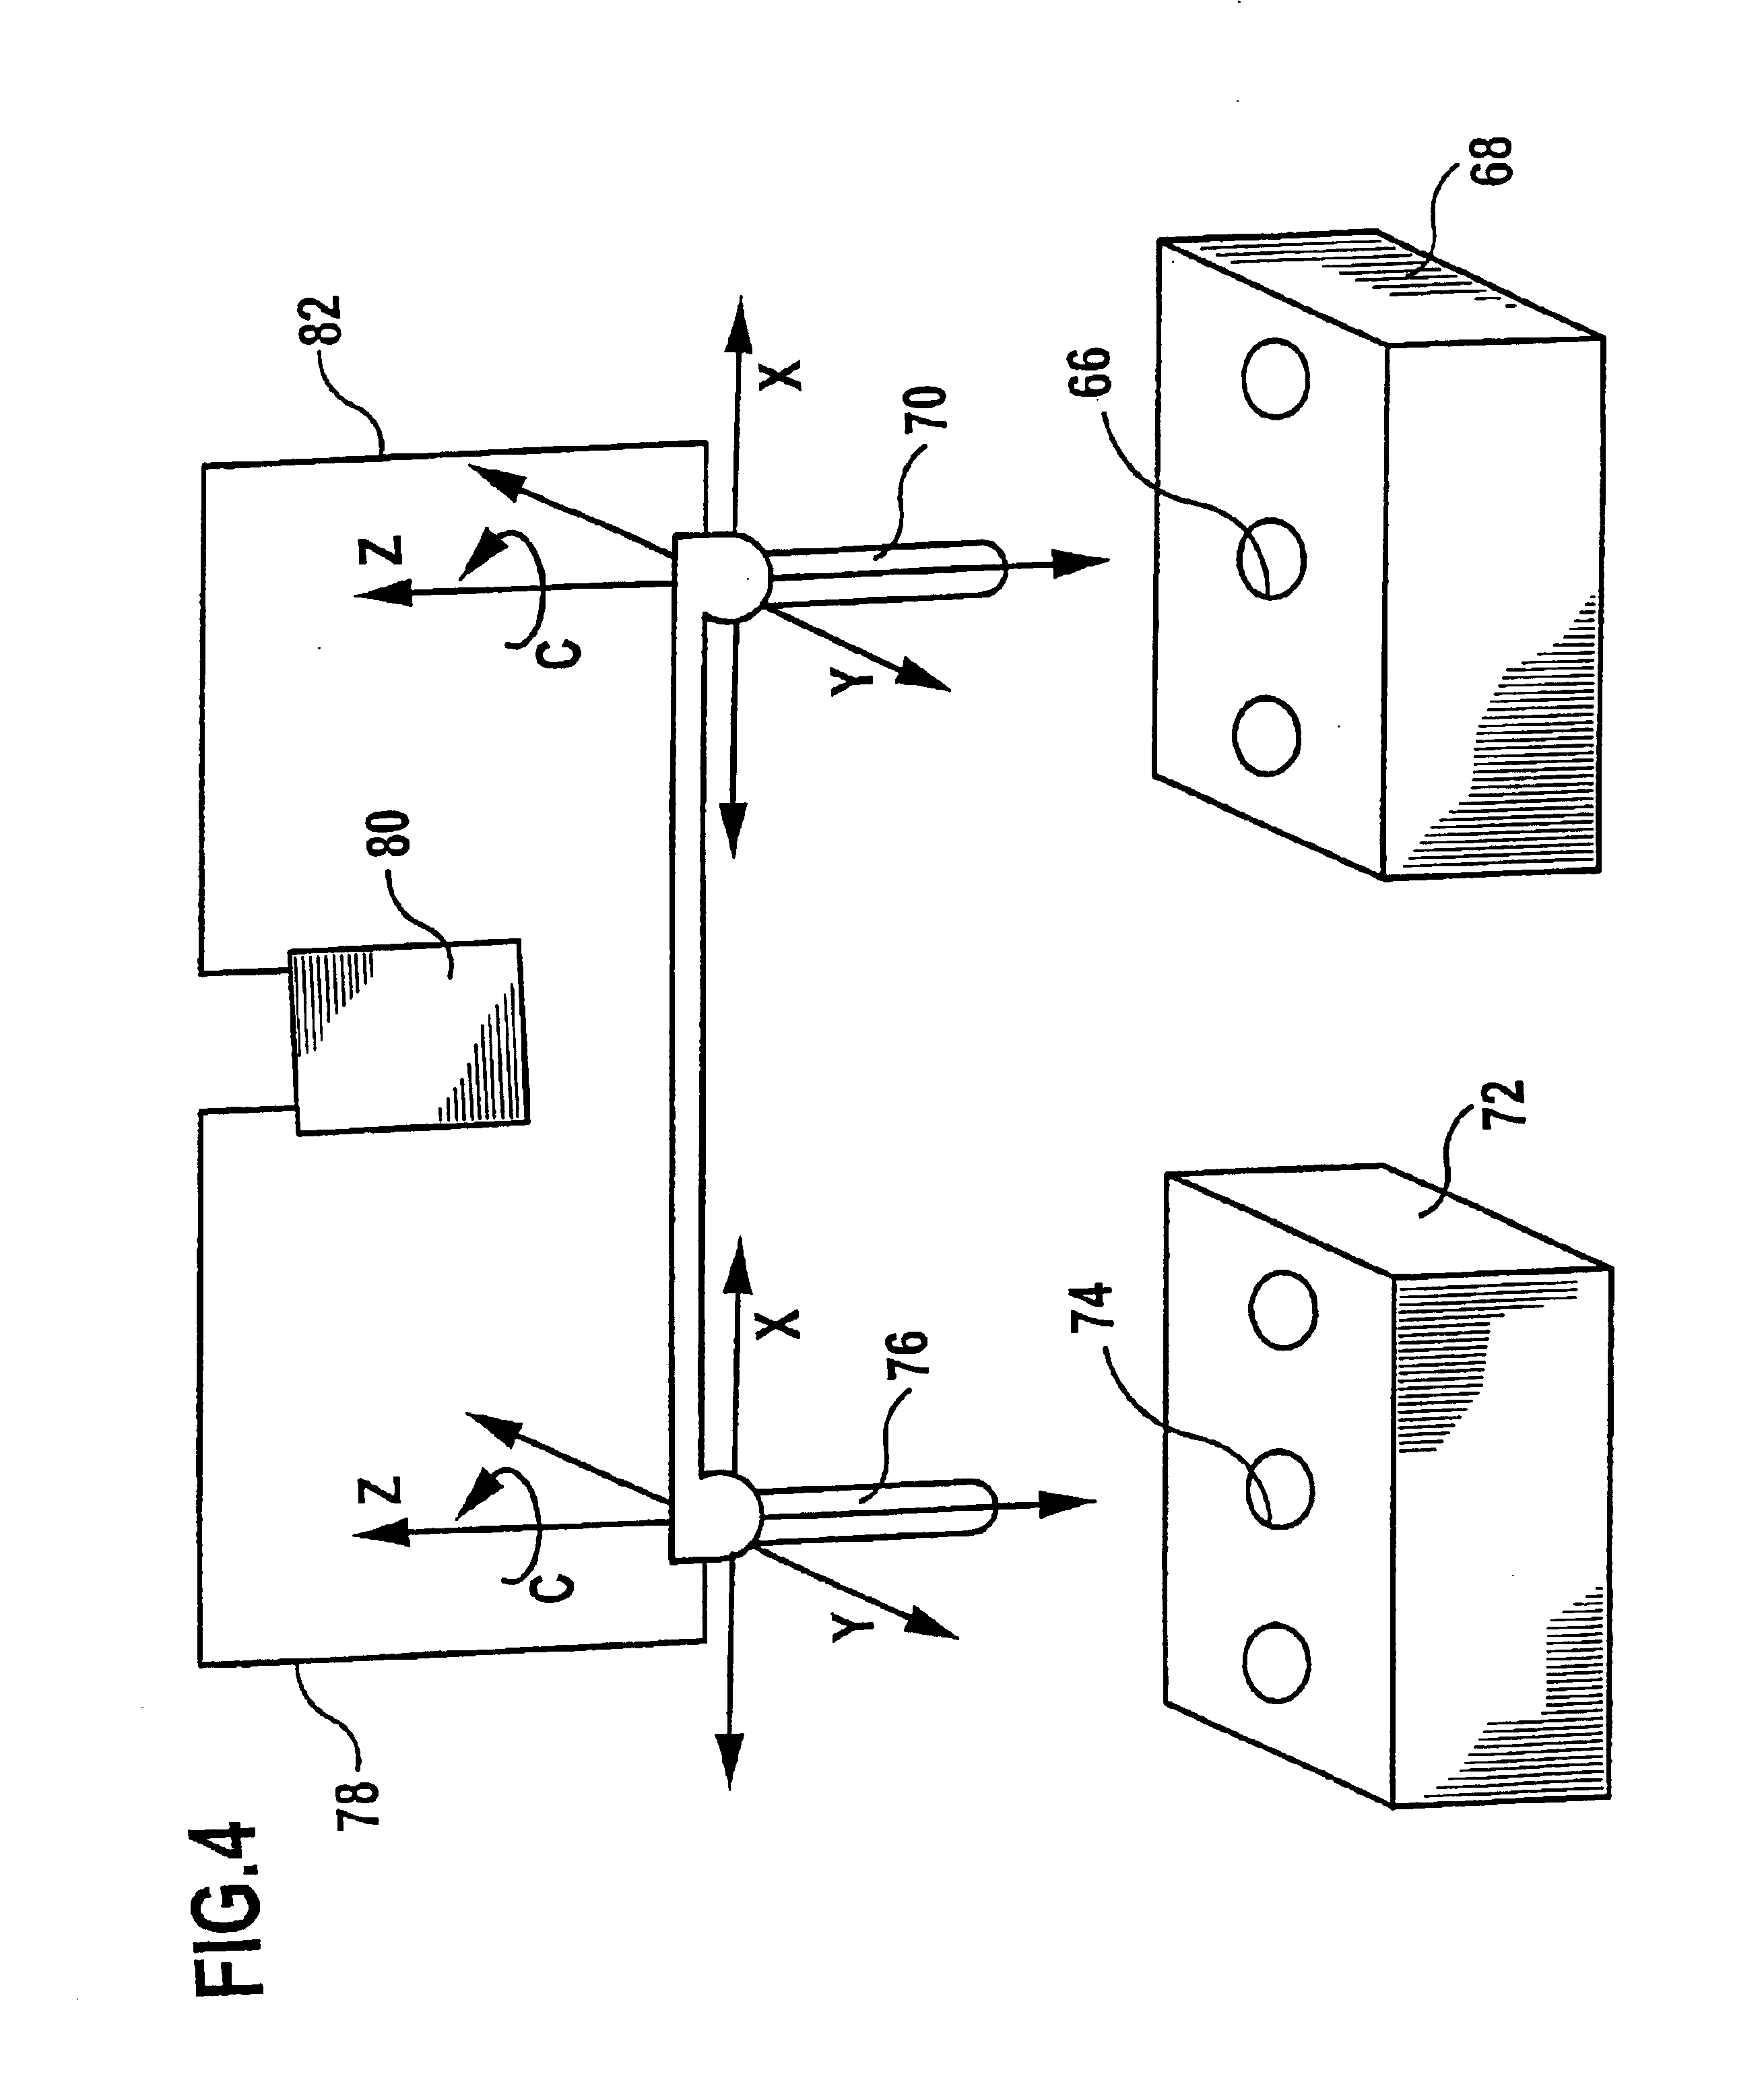 Device and method for checking bores in or edges on an object of measurement